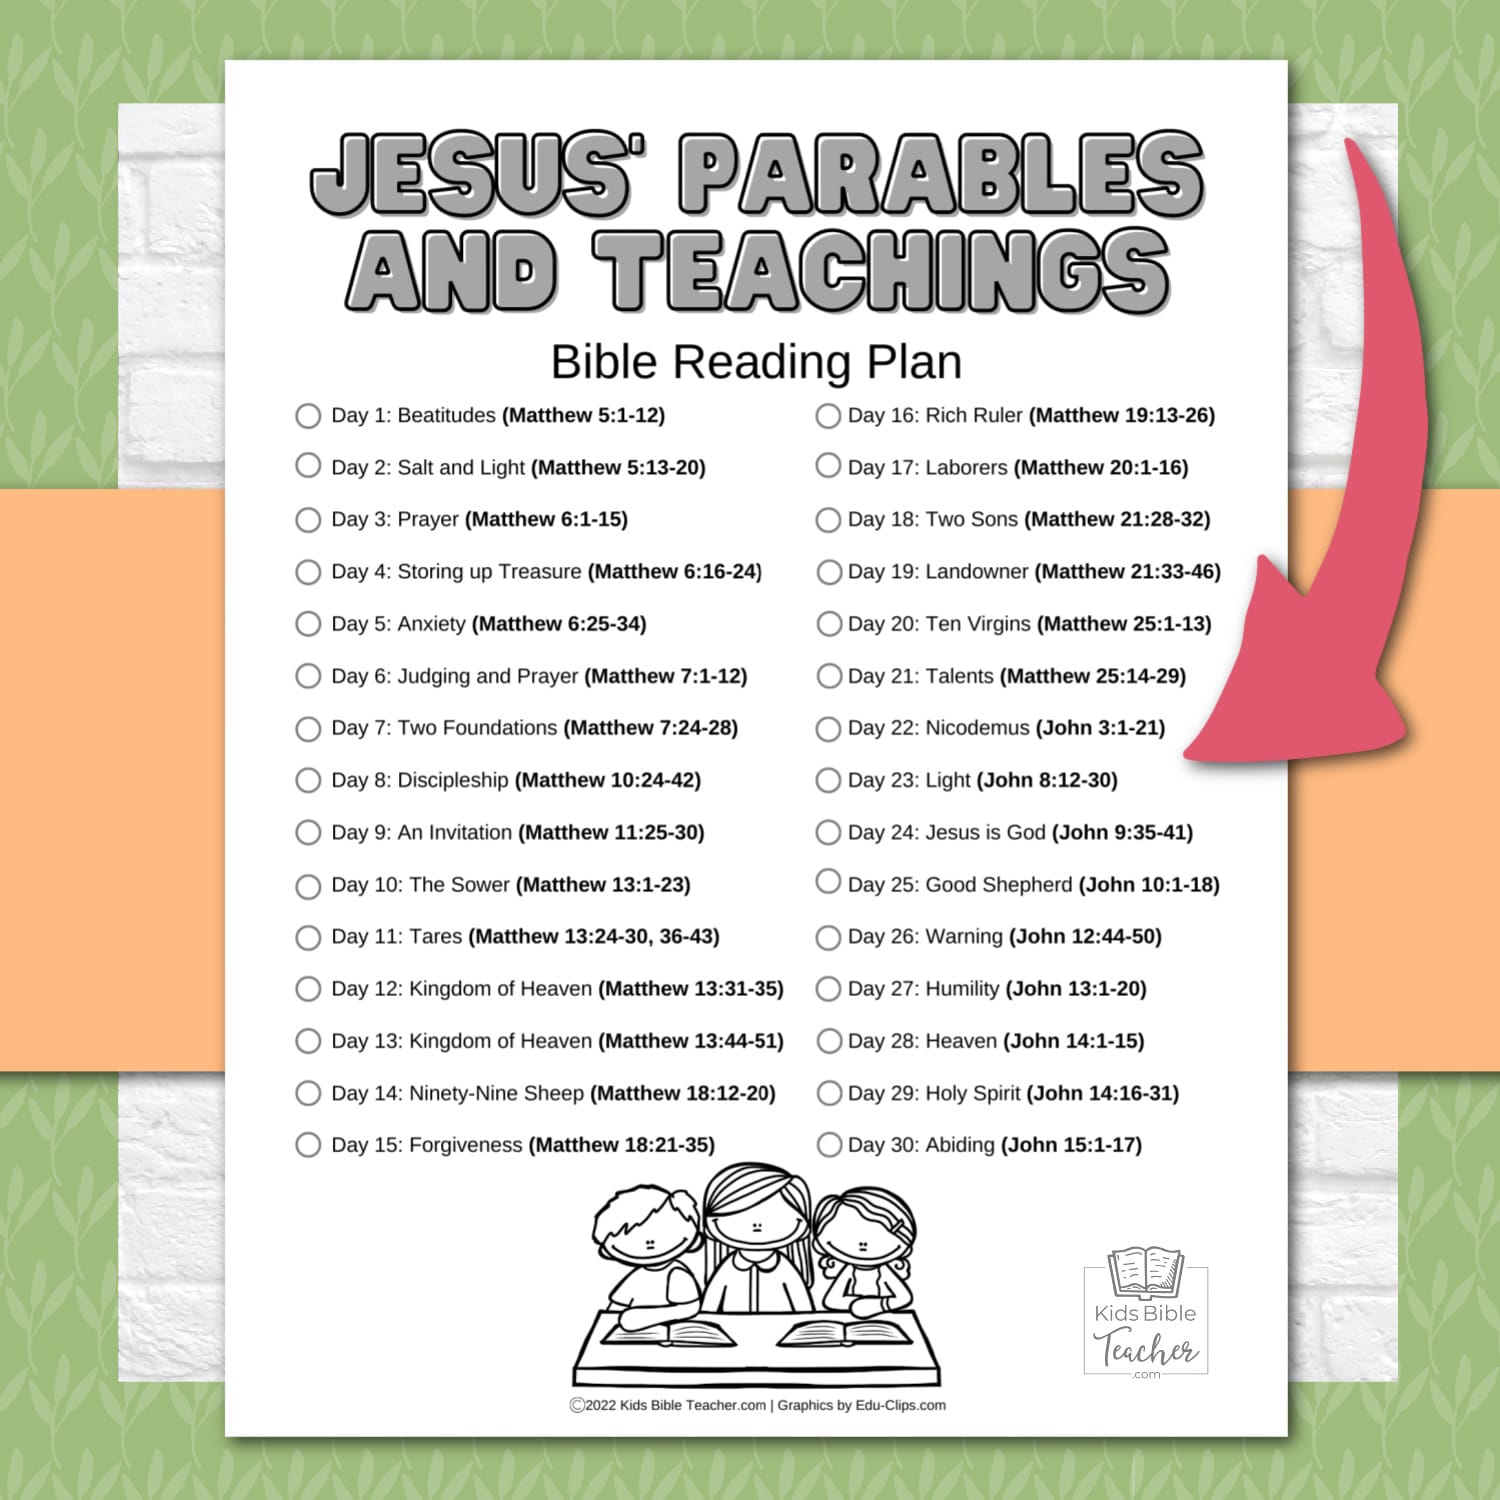 Help your kids deepen their faith with this FREE printable Jesus' Parables and Teachings Bible reading plan for kids.